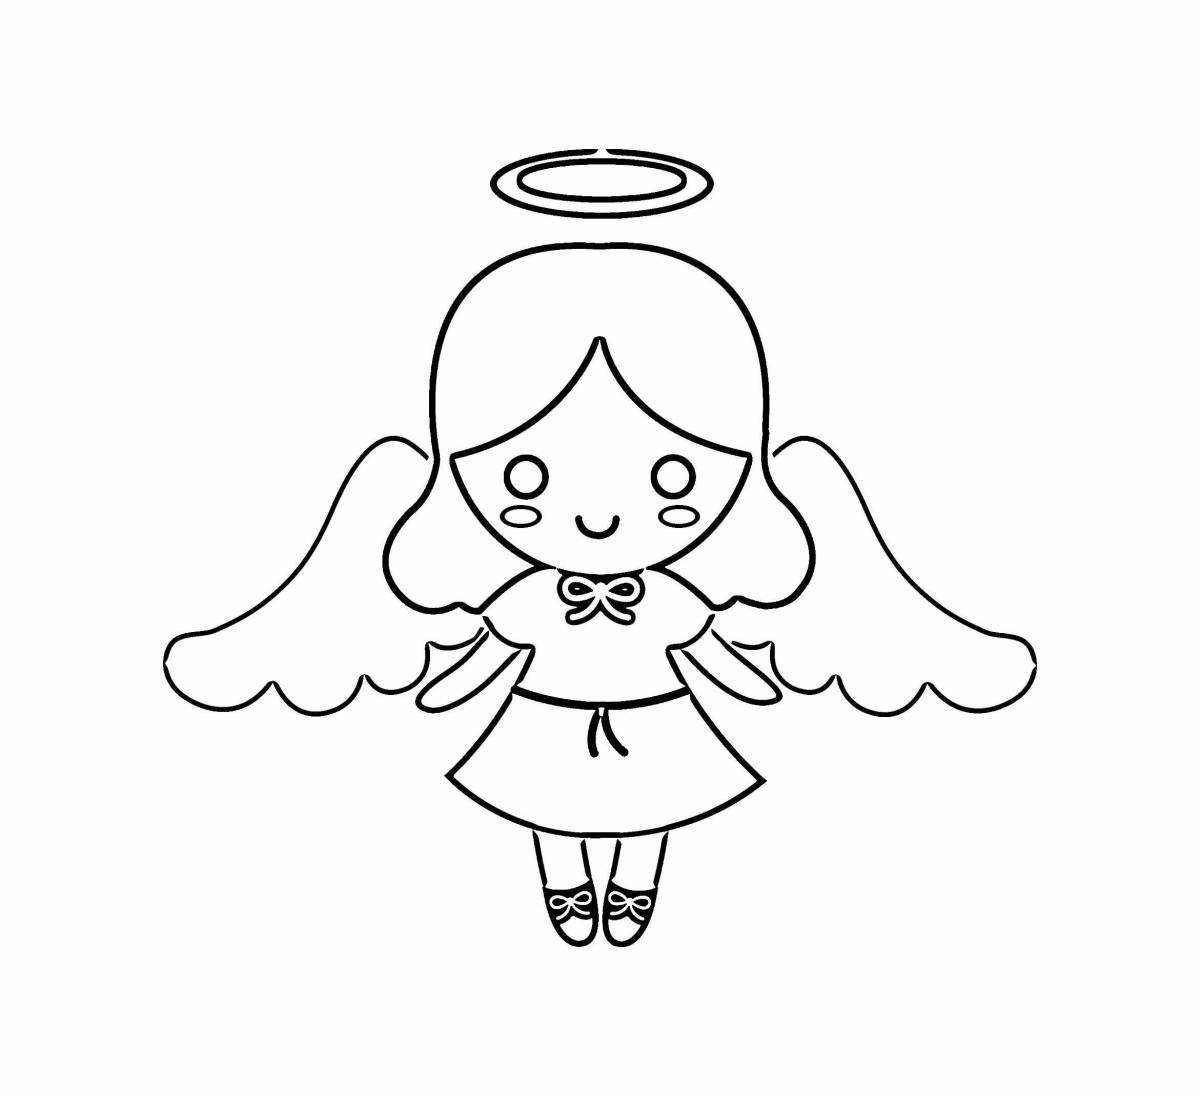 Fluffy angel coloring book for 3-4 year olds